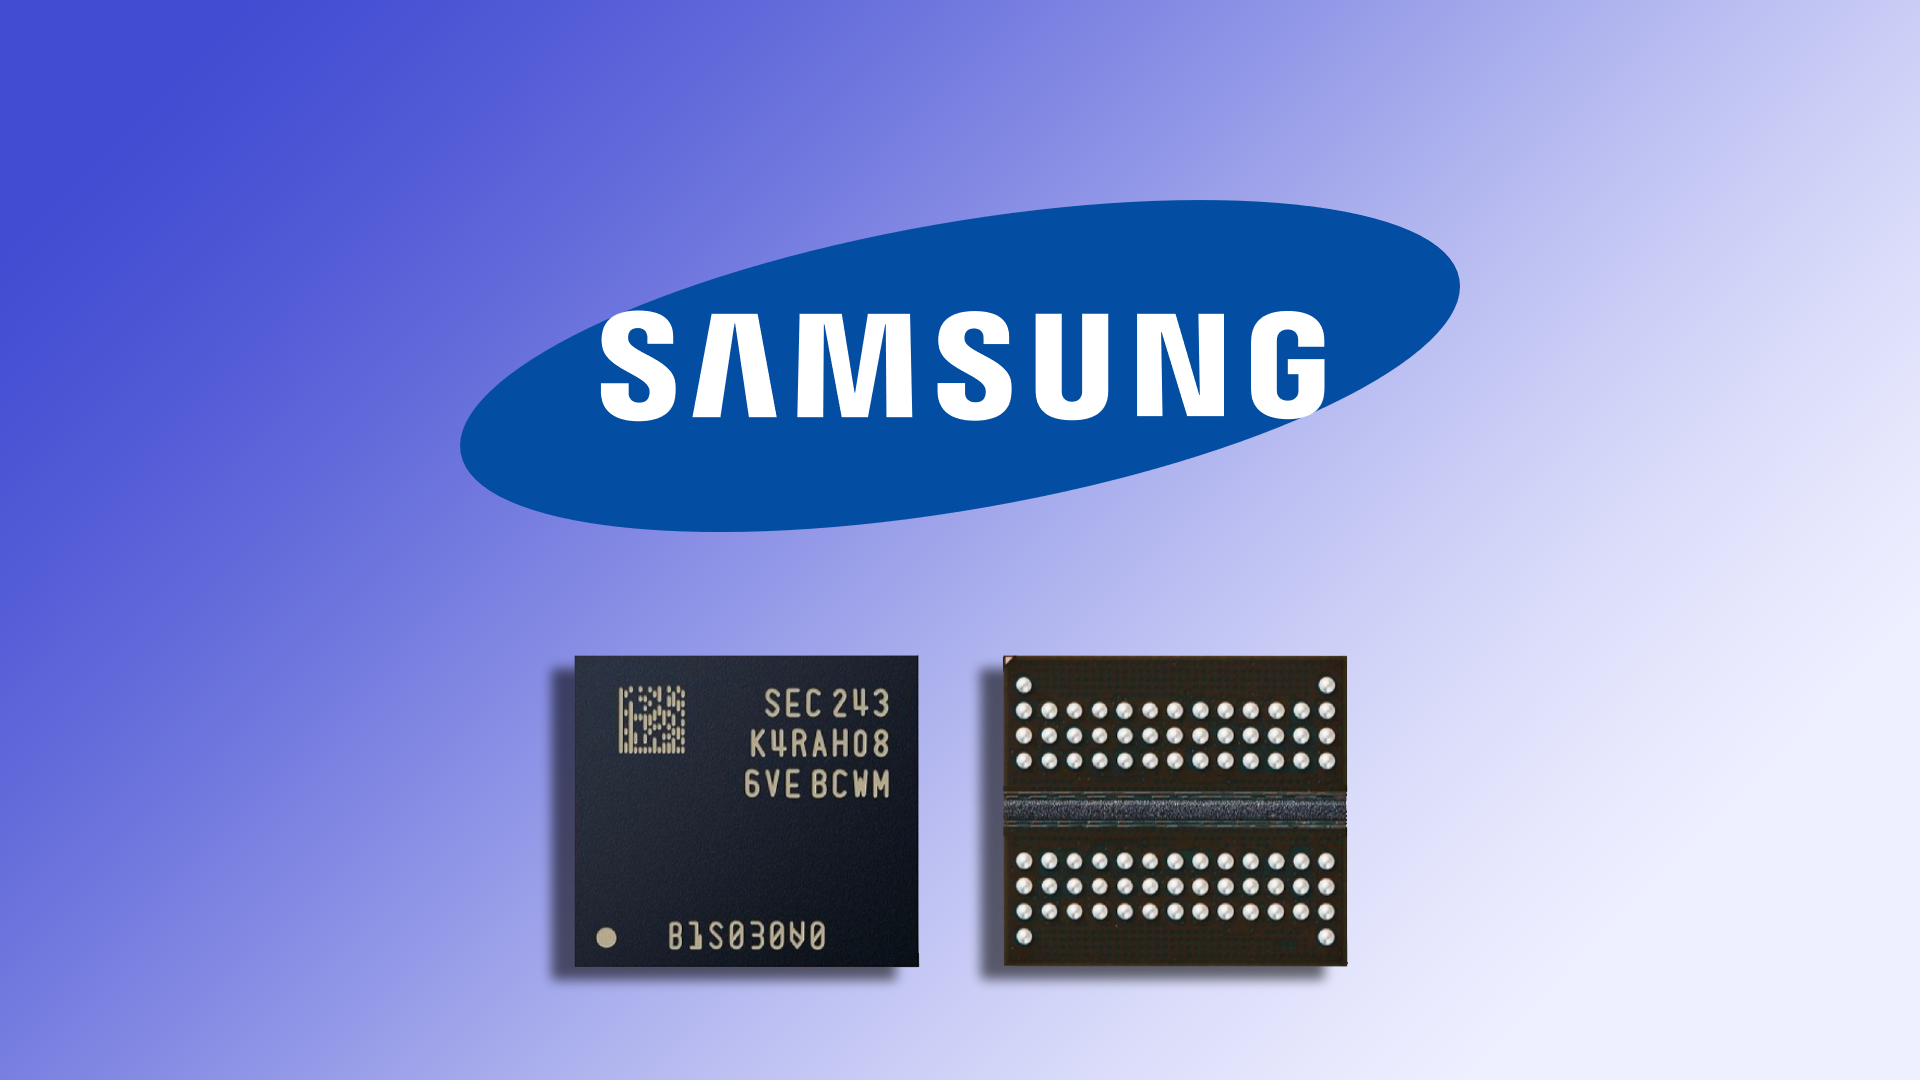 Samsung announced new DDR5 memory chips